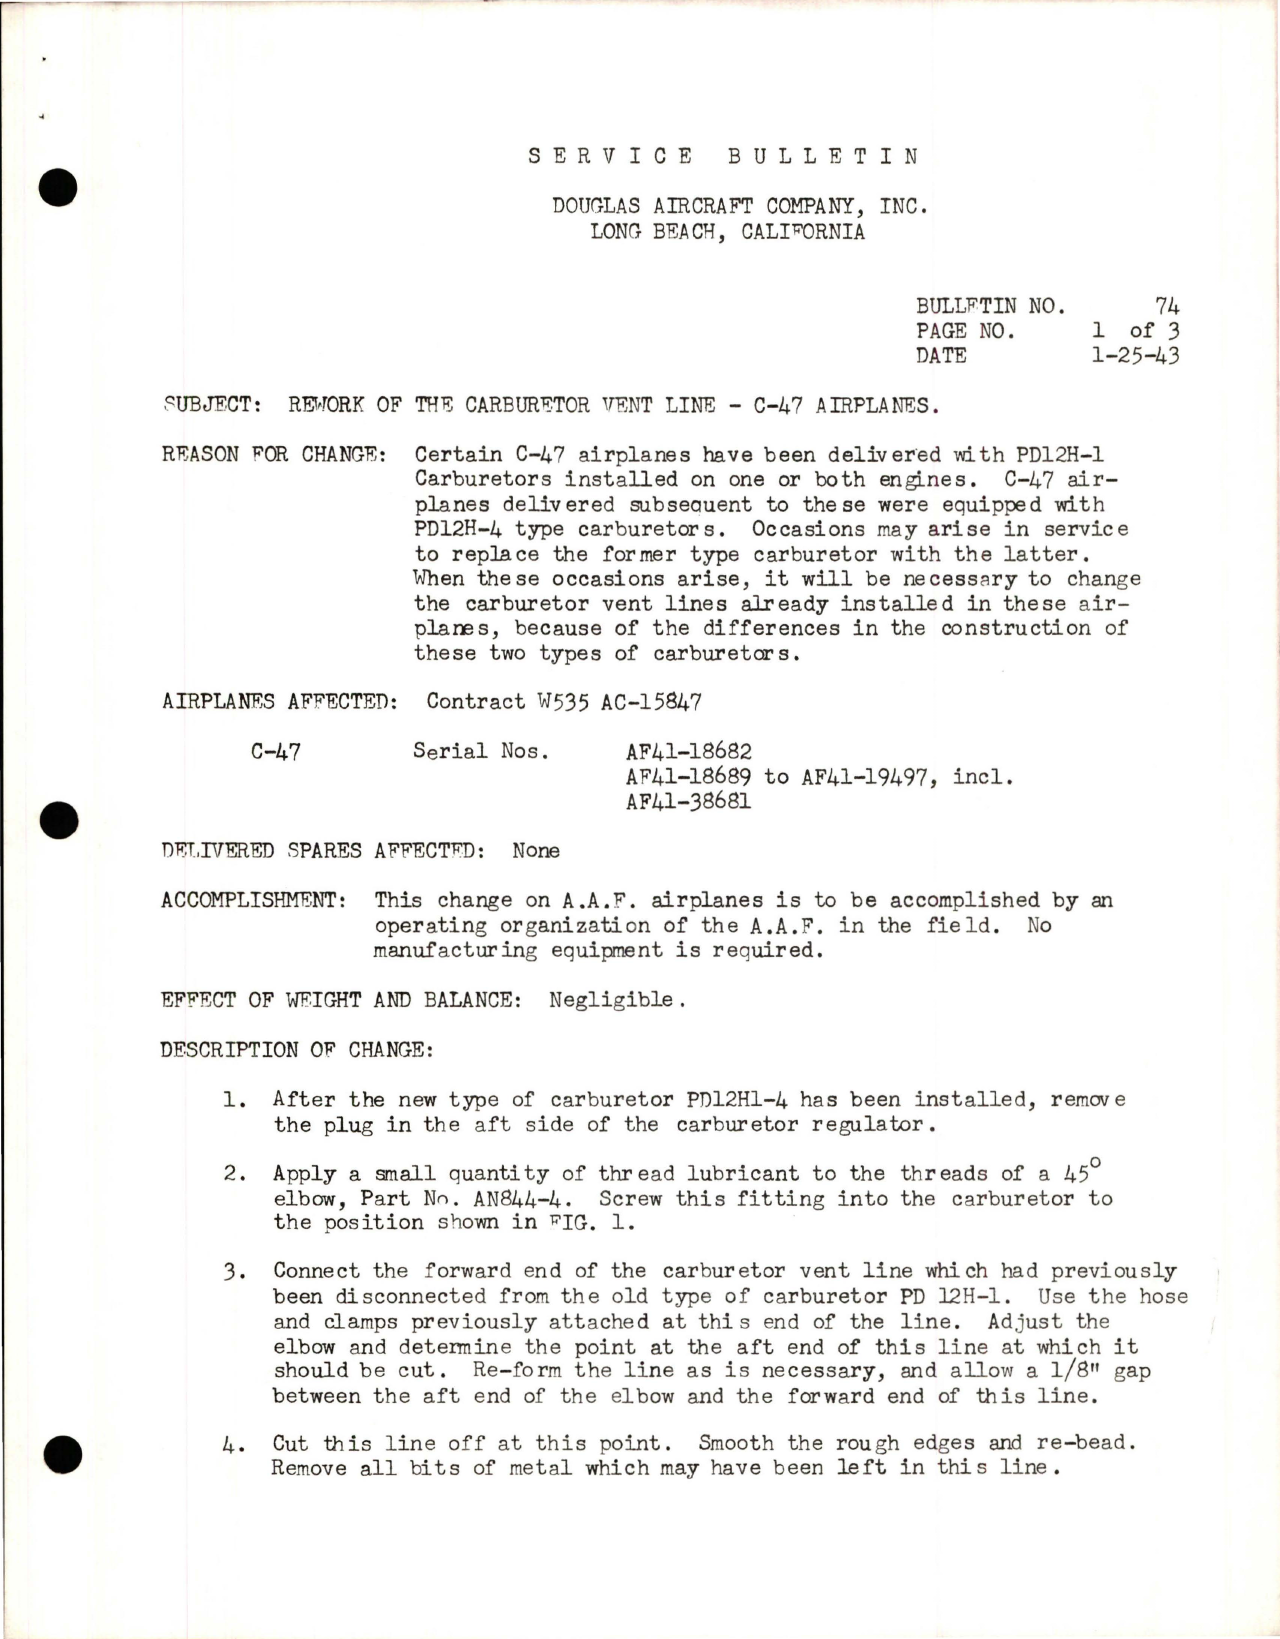 Sample page 1 from AirCorps Library document: Rework of the Carburetor Vent Line